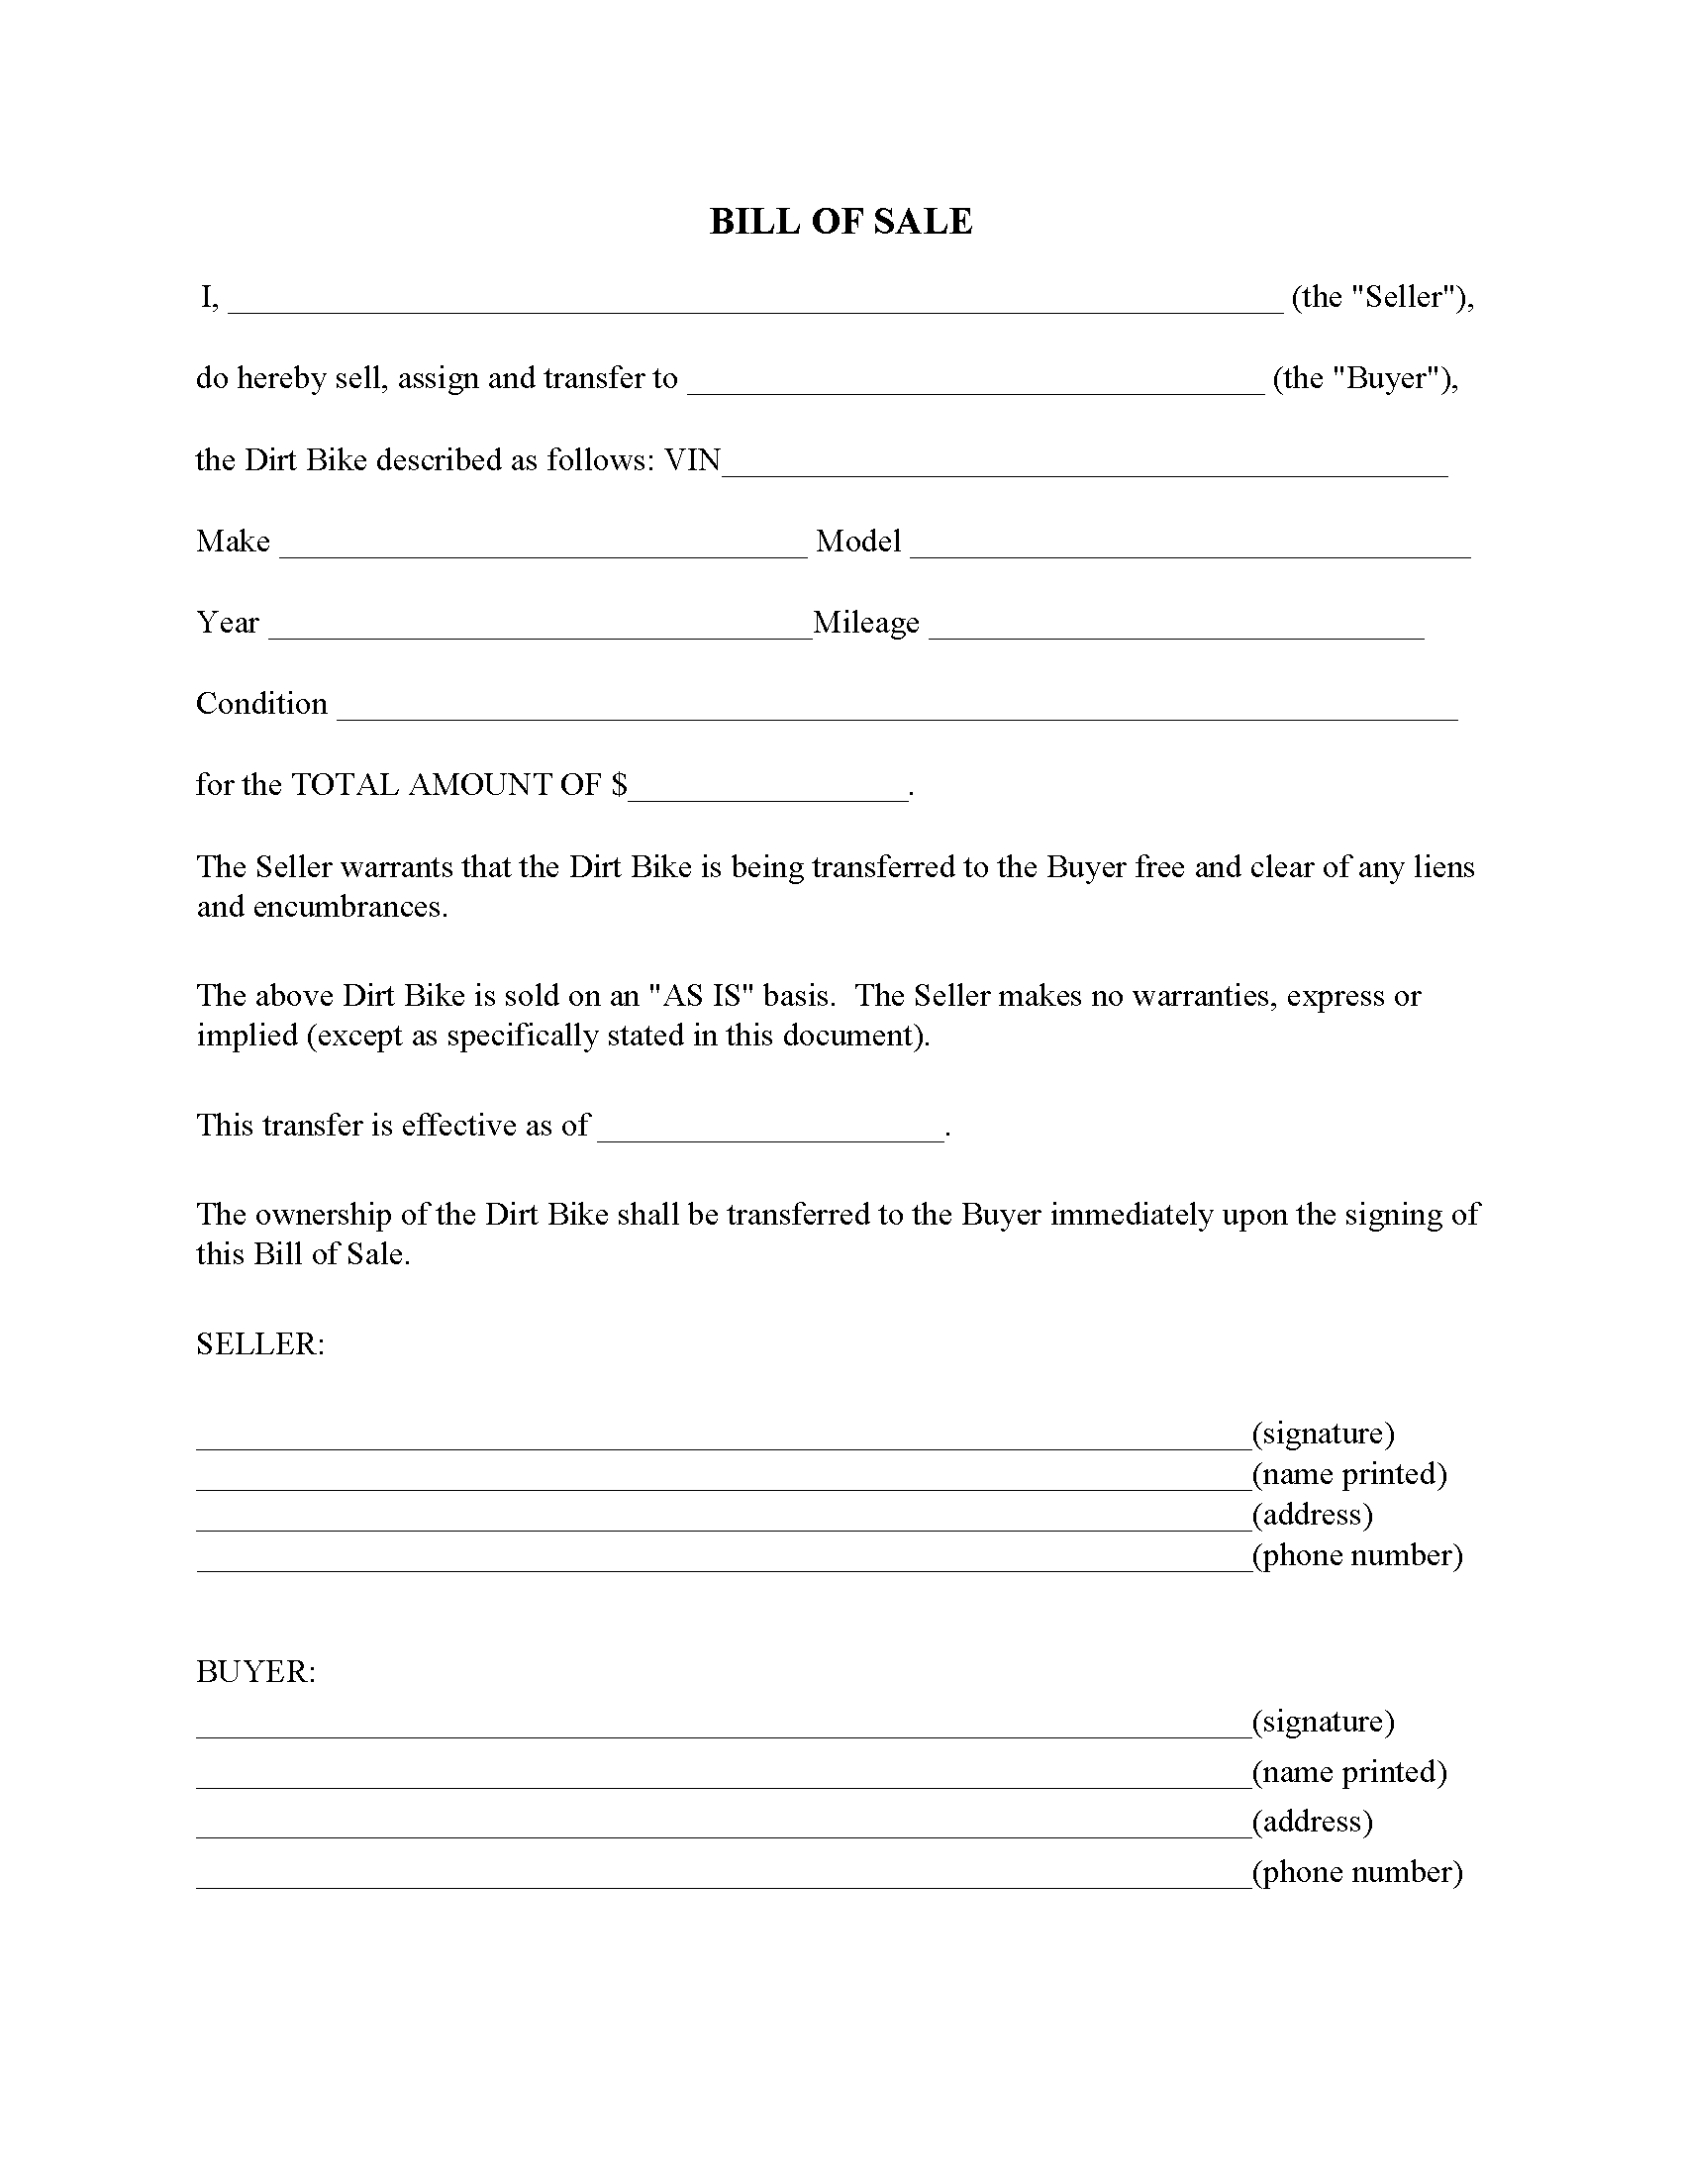 Dirt Bike Bill Of Sale Form - Fillable Pdf - Free Printable Legal Forms In Legal Bill Of Sale Template